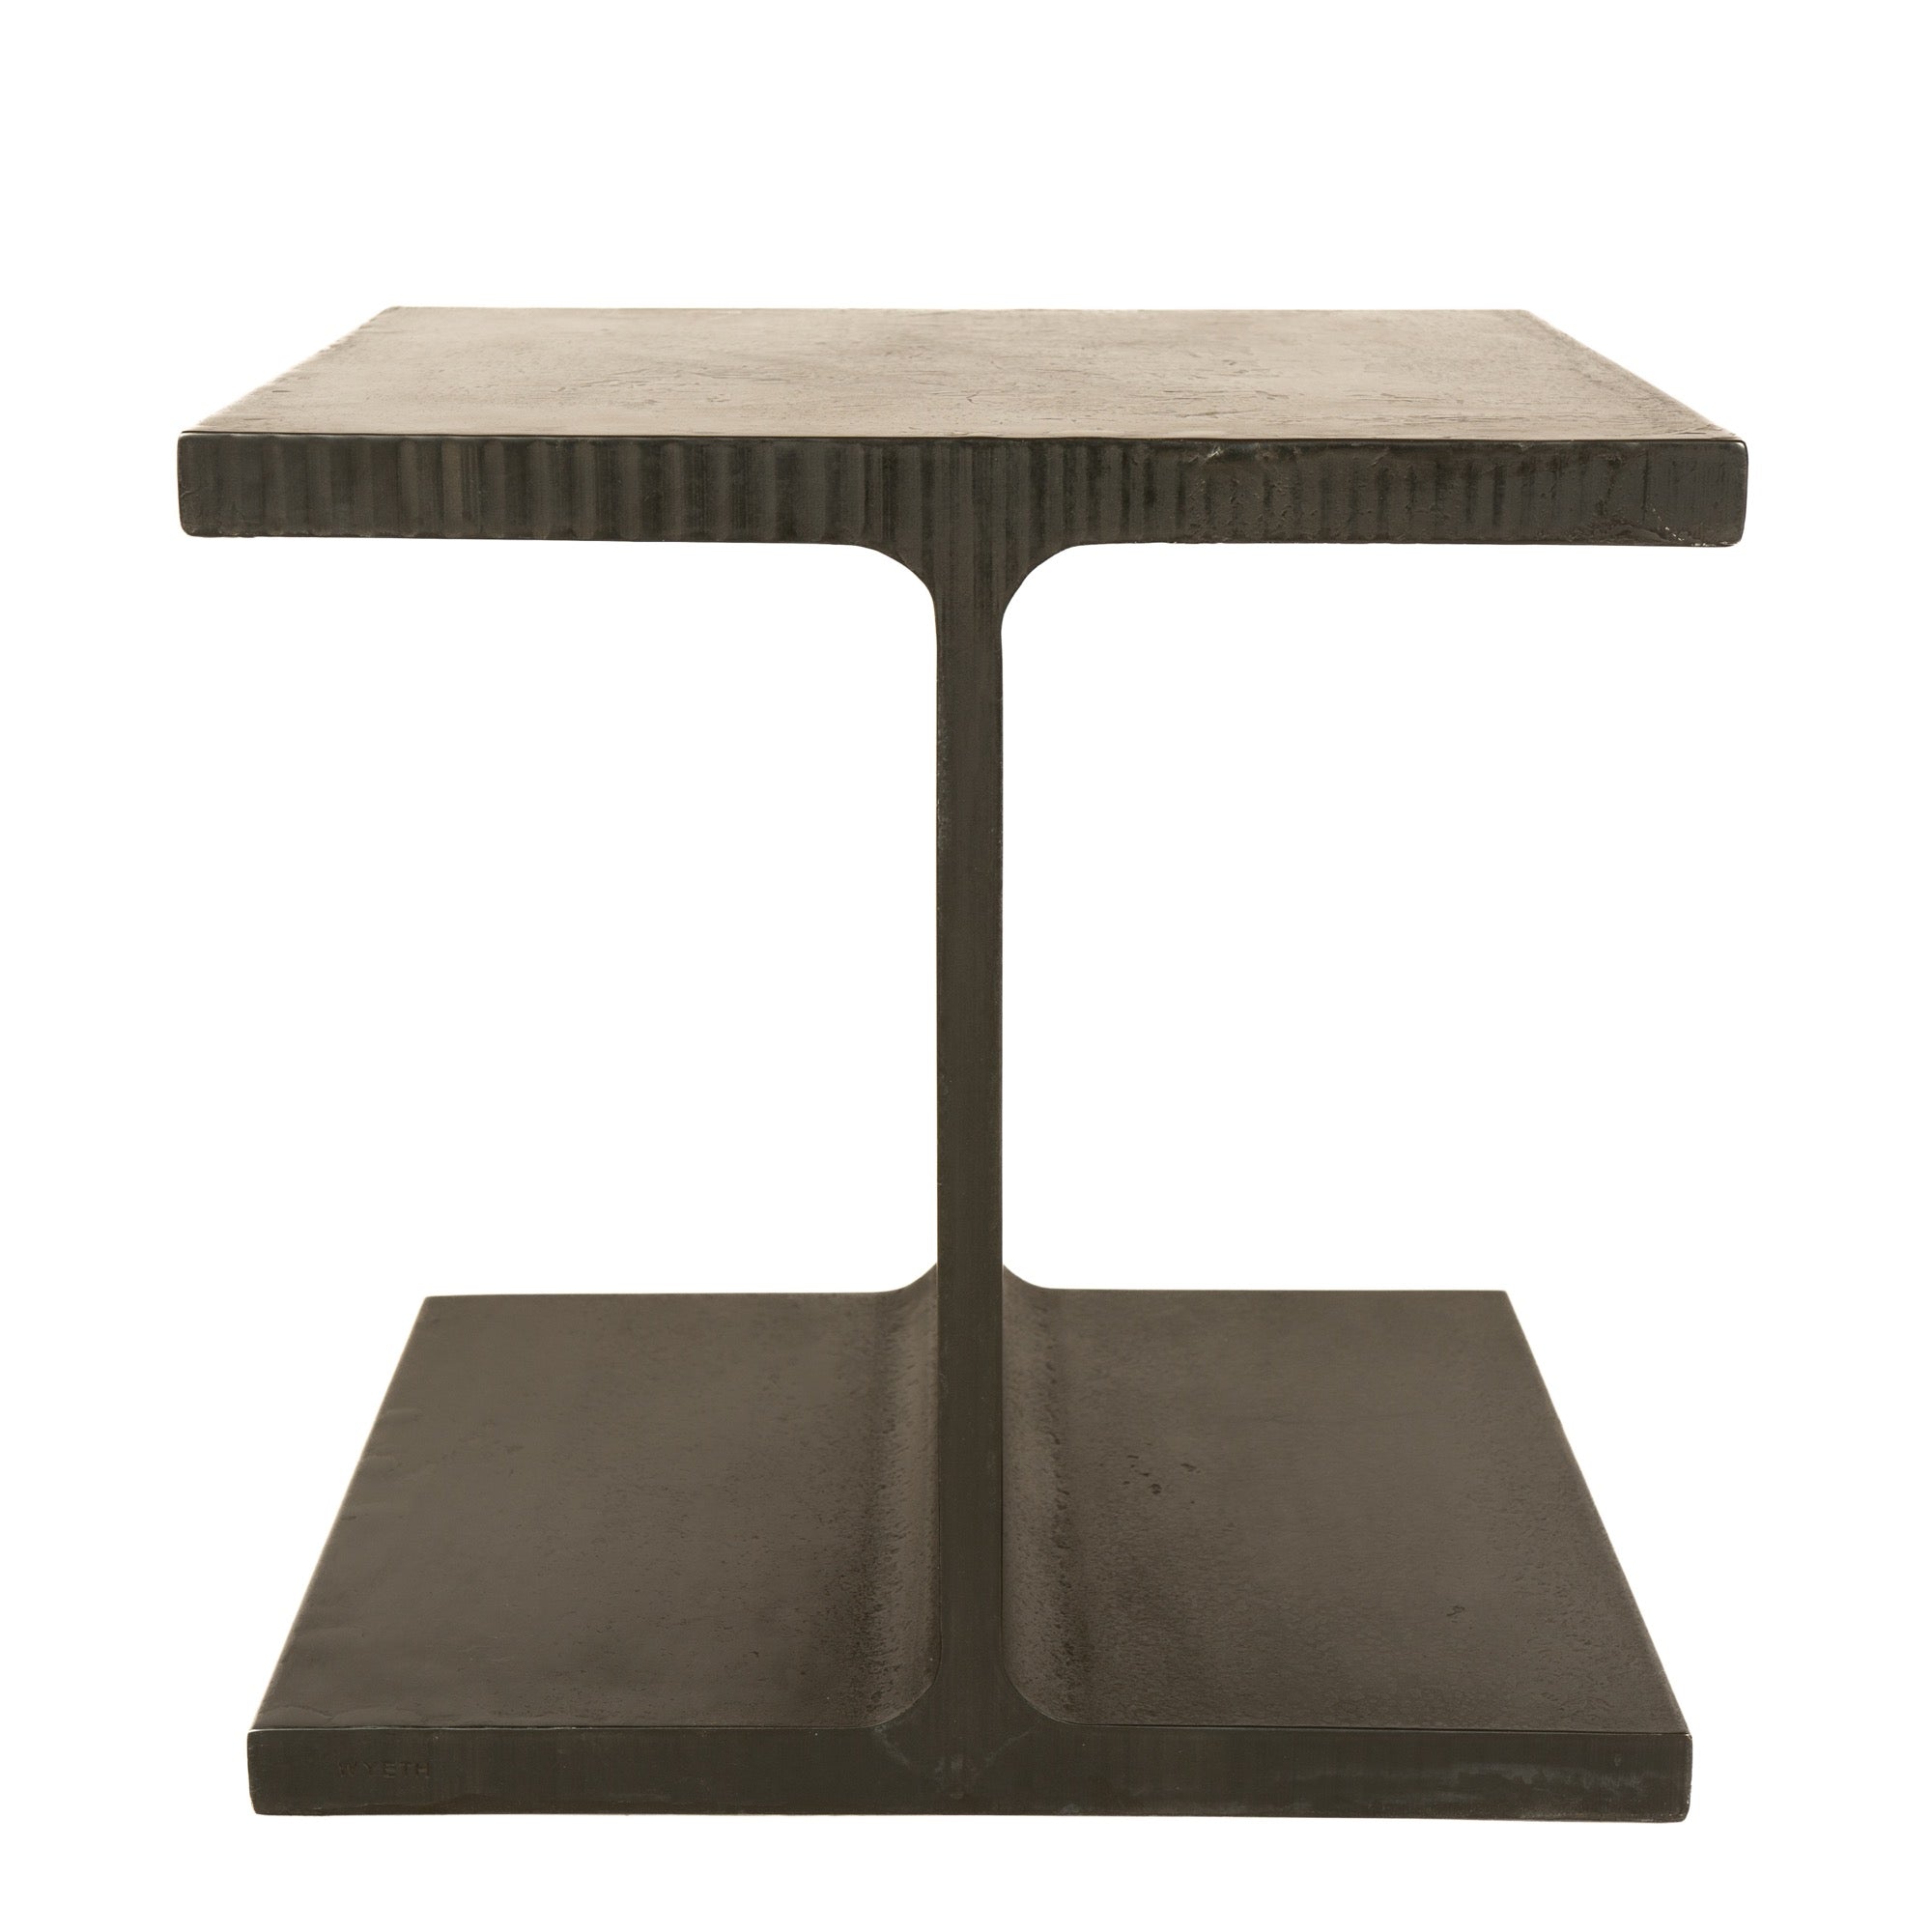 .75" Structural Steel I Beam Table by WYETH, 2018